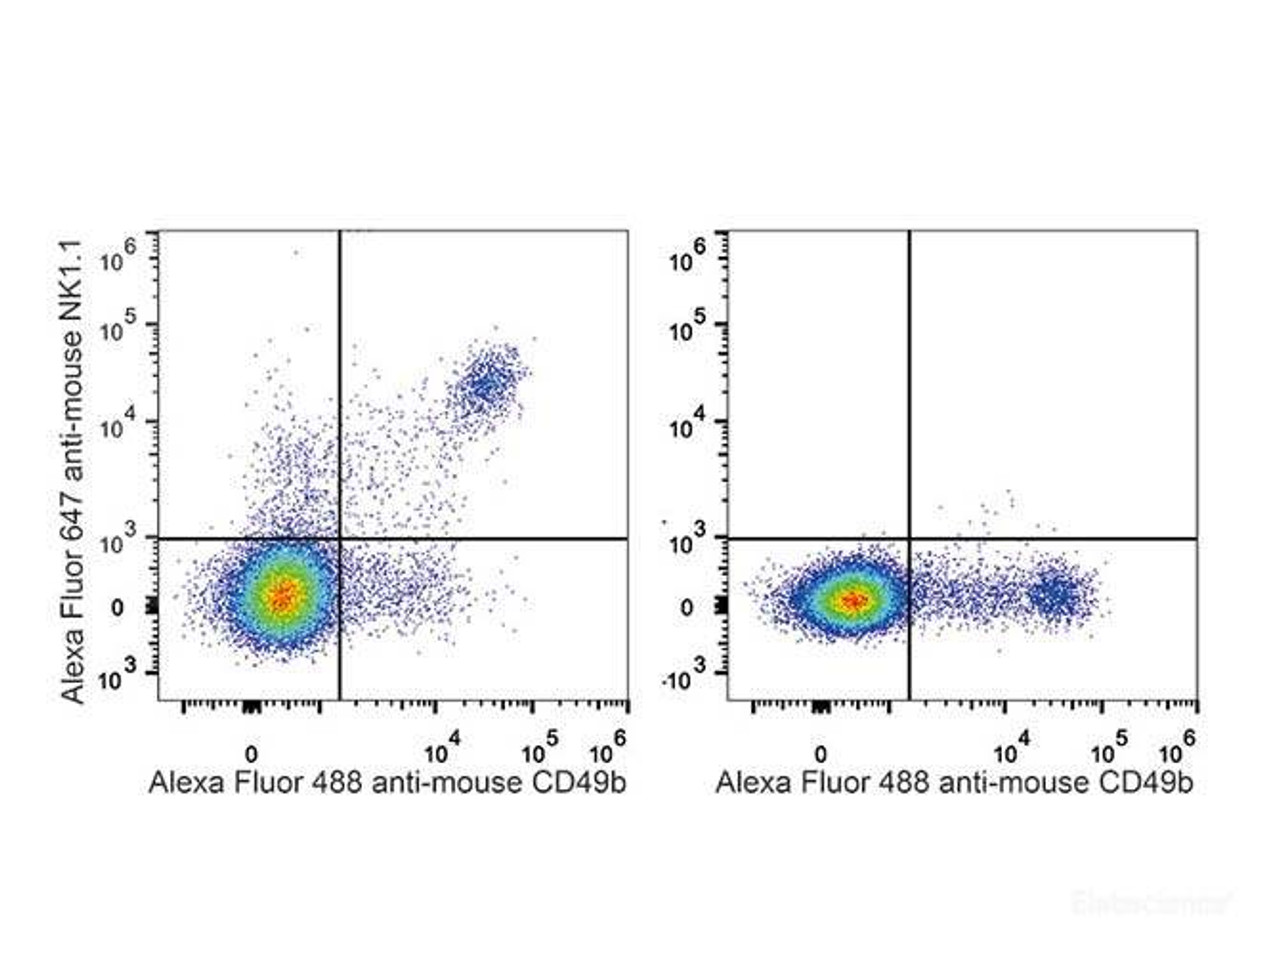 C57BL/6 murine splenocytes are stained with AF647 Anti-Mouse CD161/NK1.1 Antibody and AF488 Anti-Mouse CD49b Antibody(Left). Splenocytes stained with AF488 Anti-Mouse CD49b Antibody(Right) are used as control.